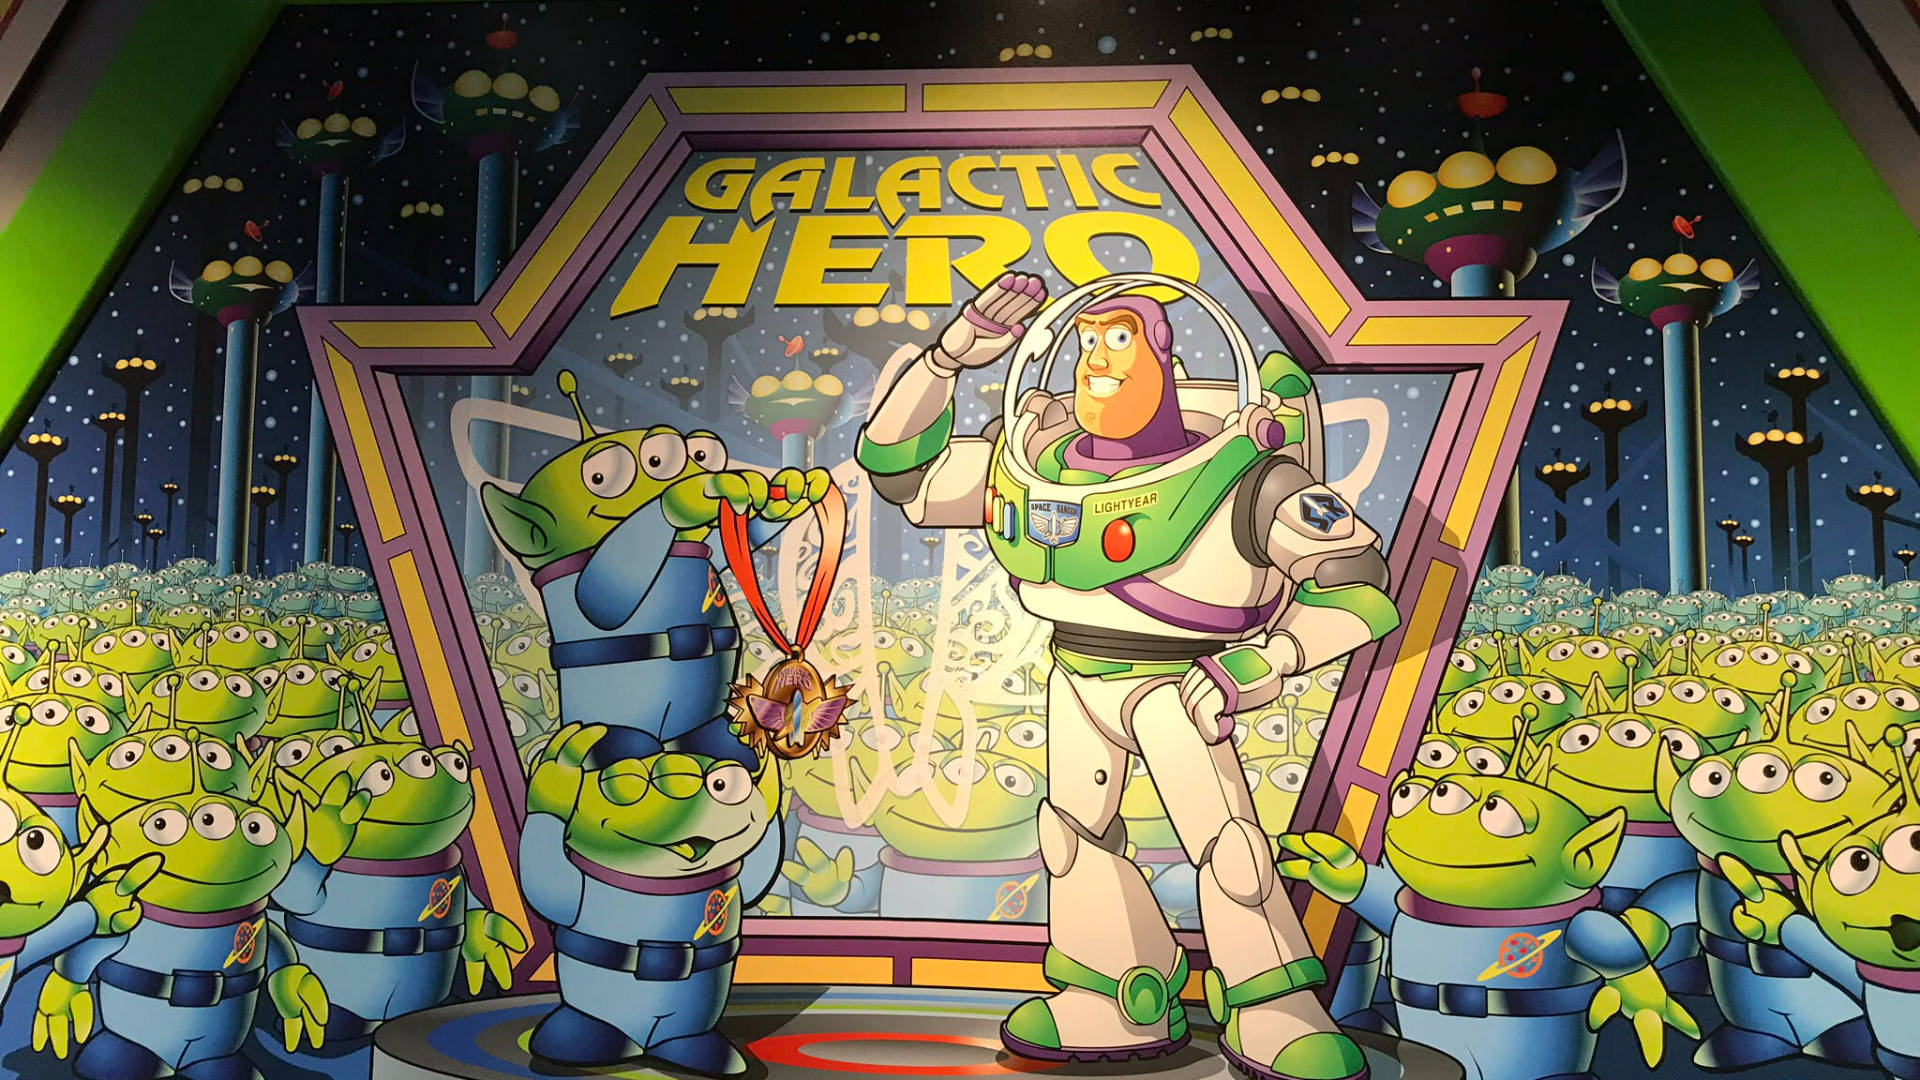 Buzz Lightyear Of Star Command Awarded With Medal Wallpaper